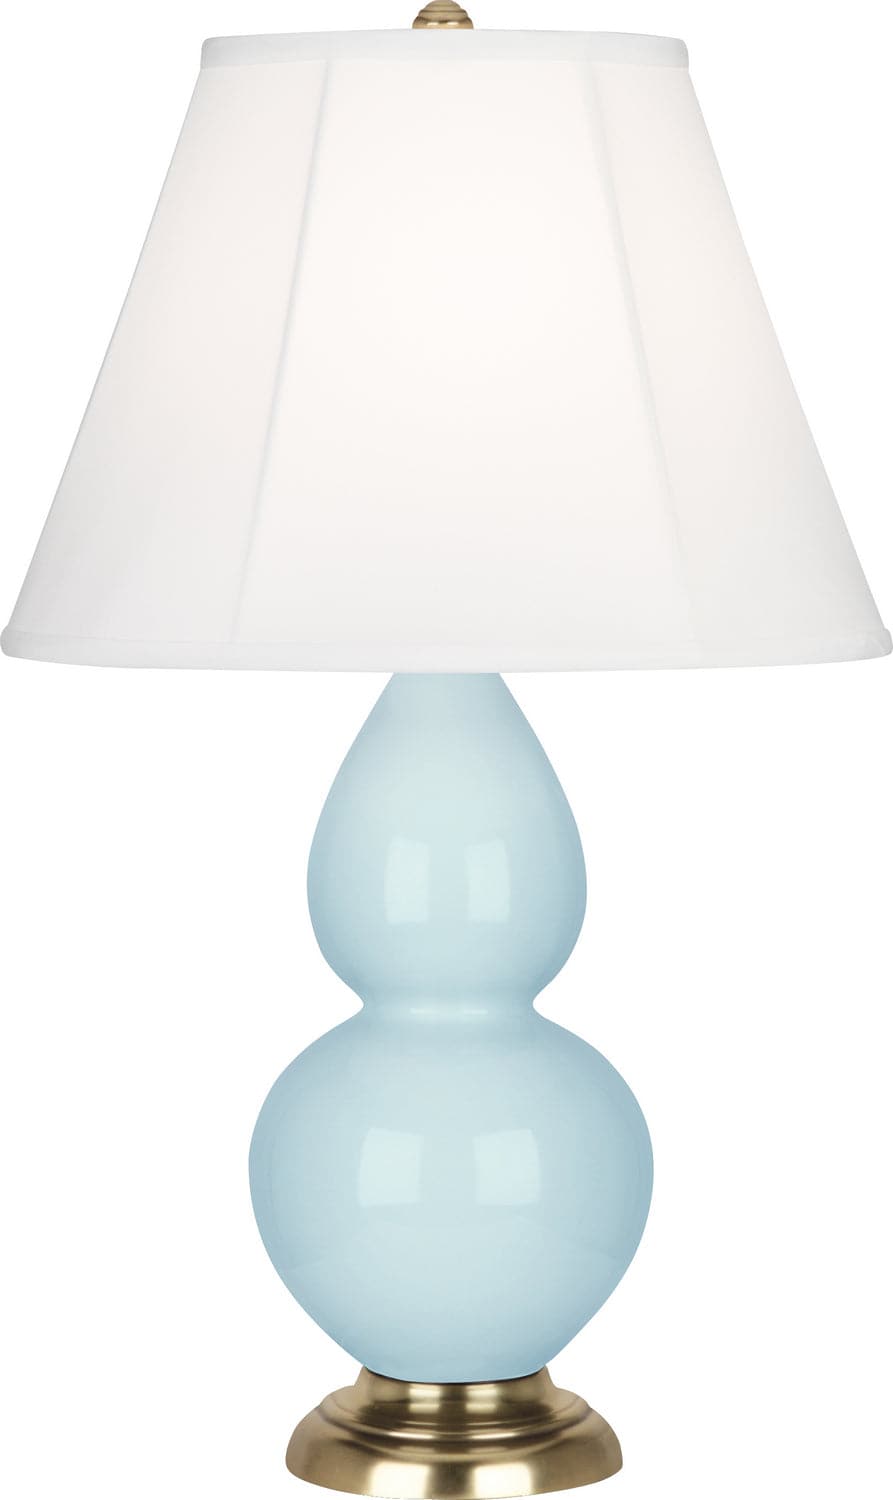 Robert Abbey - 1689 - One Light Accent Lamp - Small Double Gourd - Baby Blue Glazed w/Antique Natural Brass